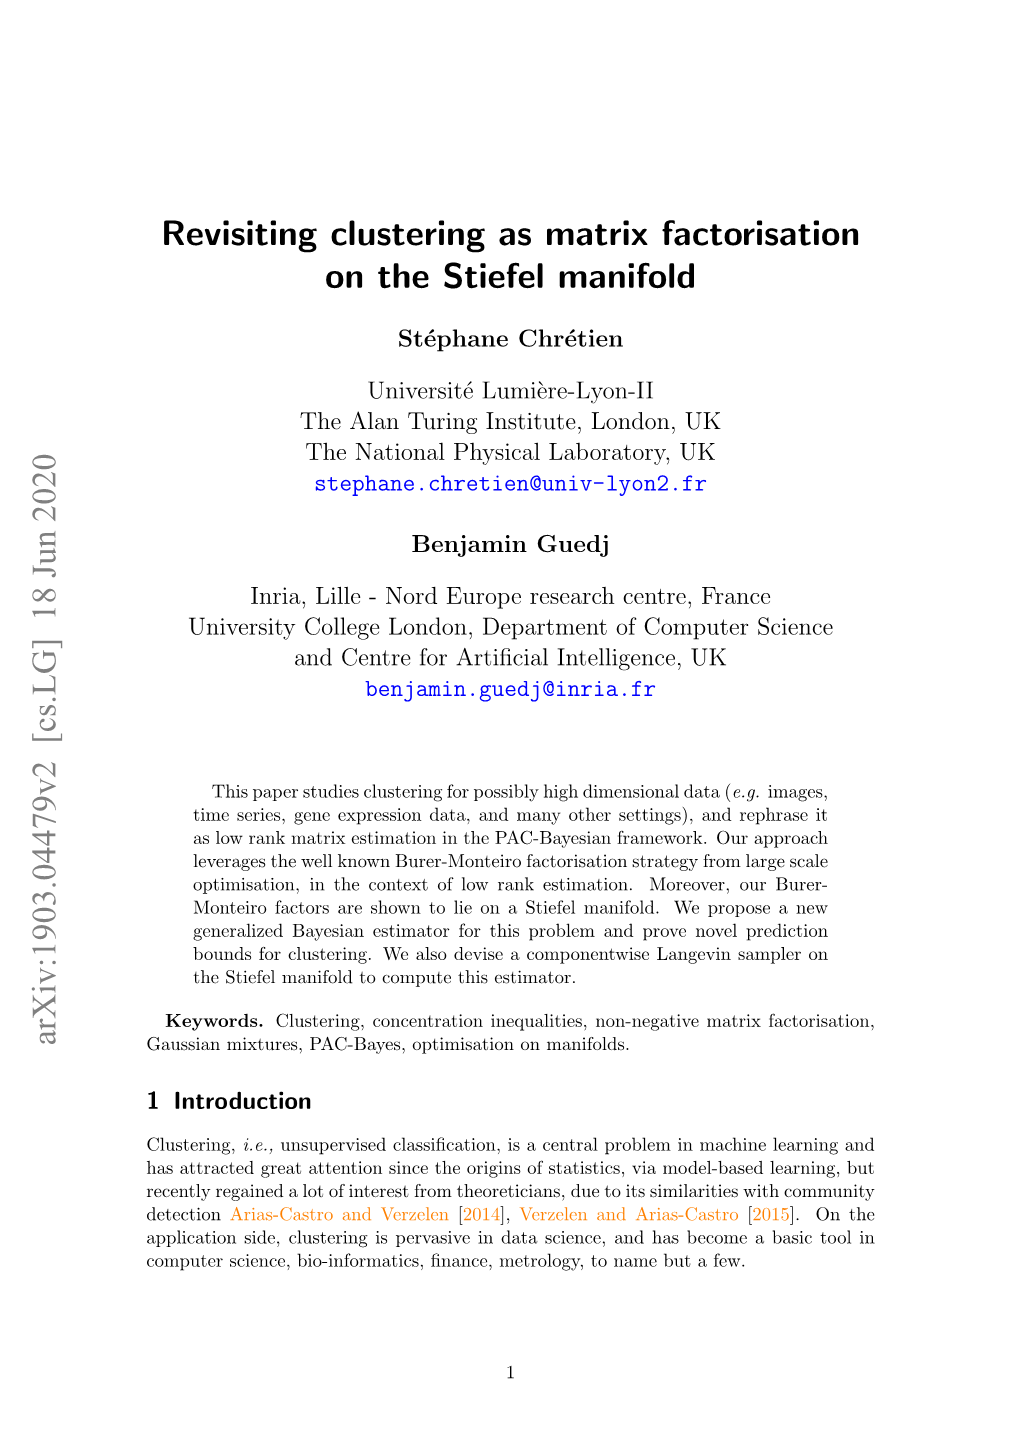 Revisiting Clustering As Matrix Factorisation on the Stiefel Manifold